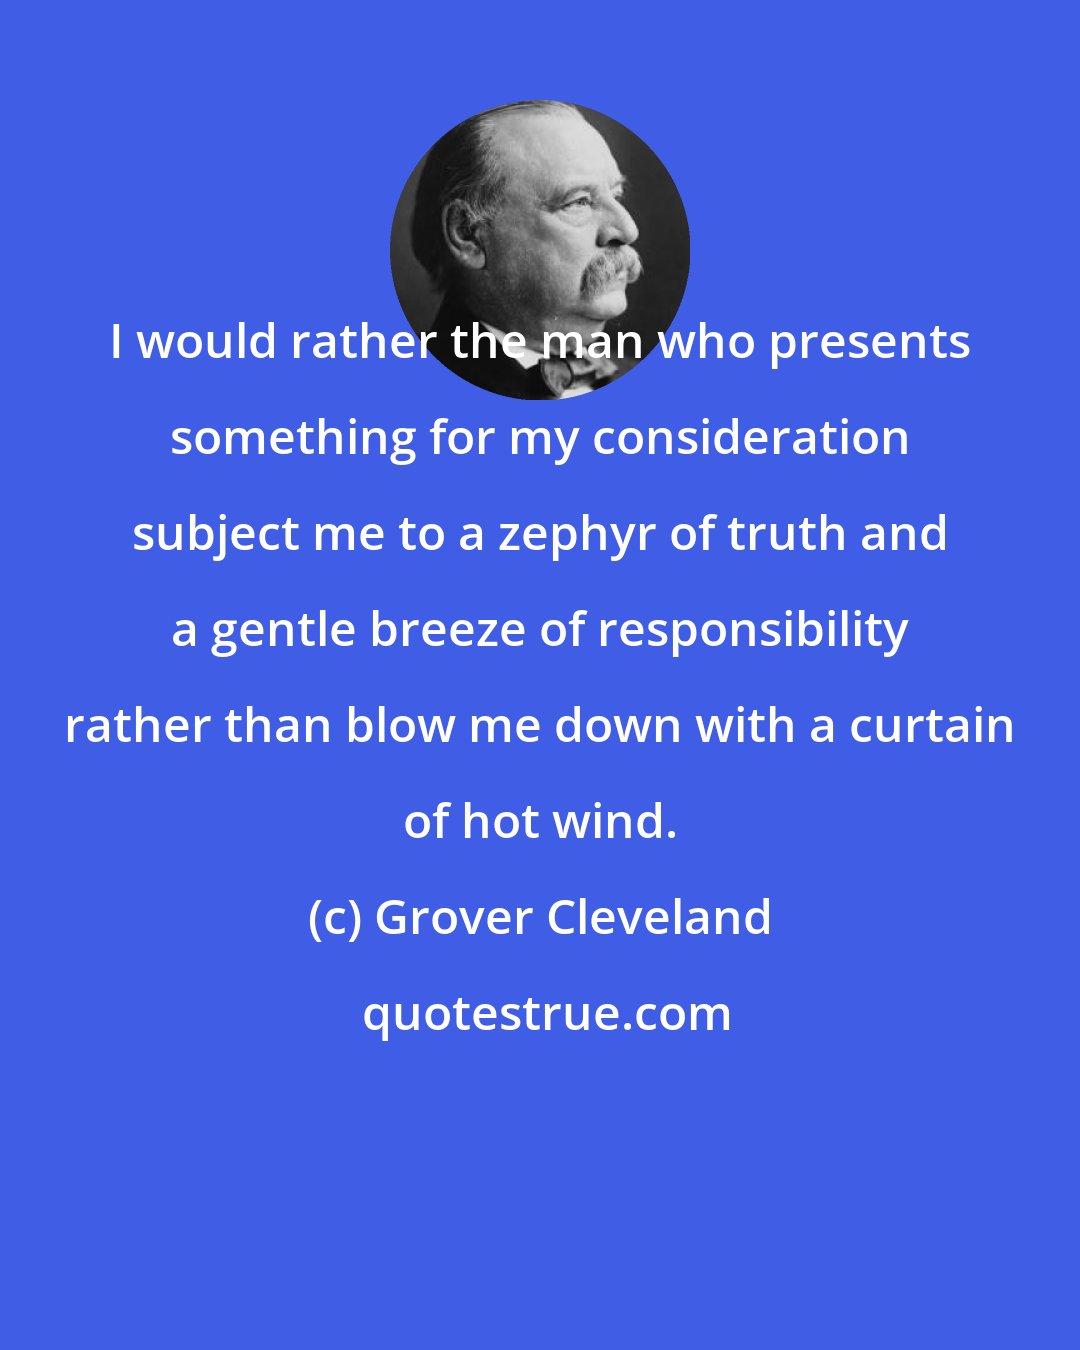 Grover Cleveland: I would rather the man who presents something for my consideration subject me to a zephyr of truth and a gentle breeze of responsibility rather than blow me down with a curtain of hot wind.